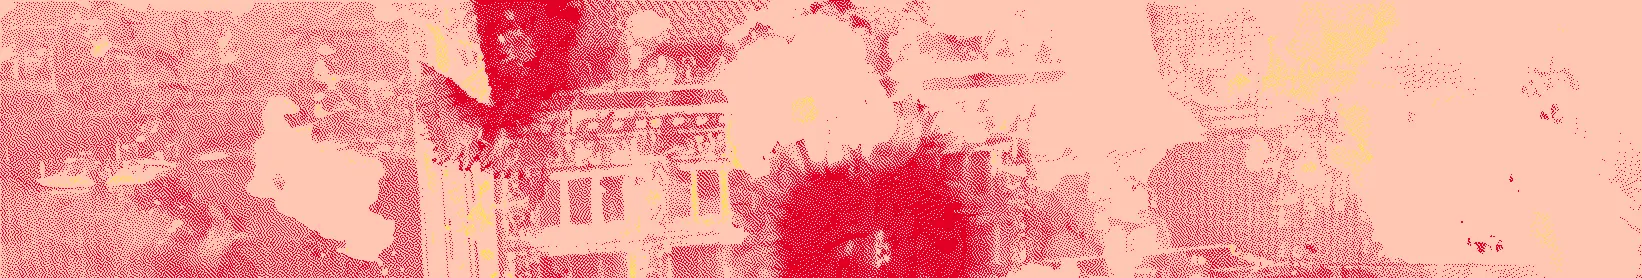 Flowers superimposed on a photograph of a building